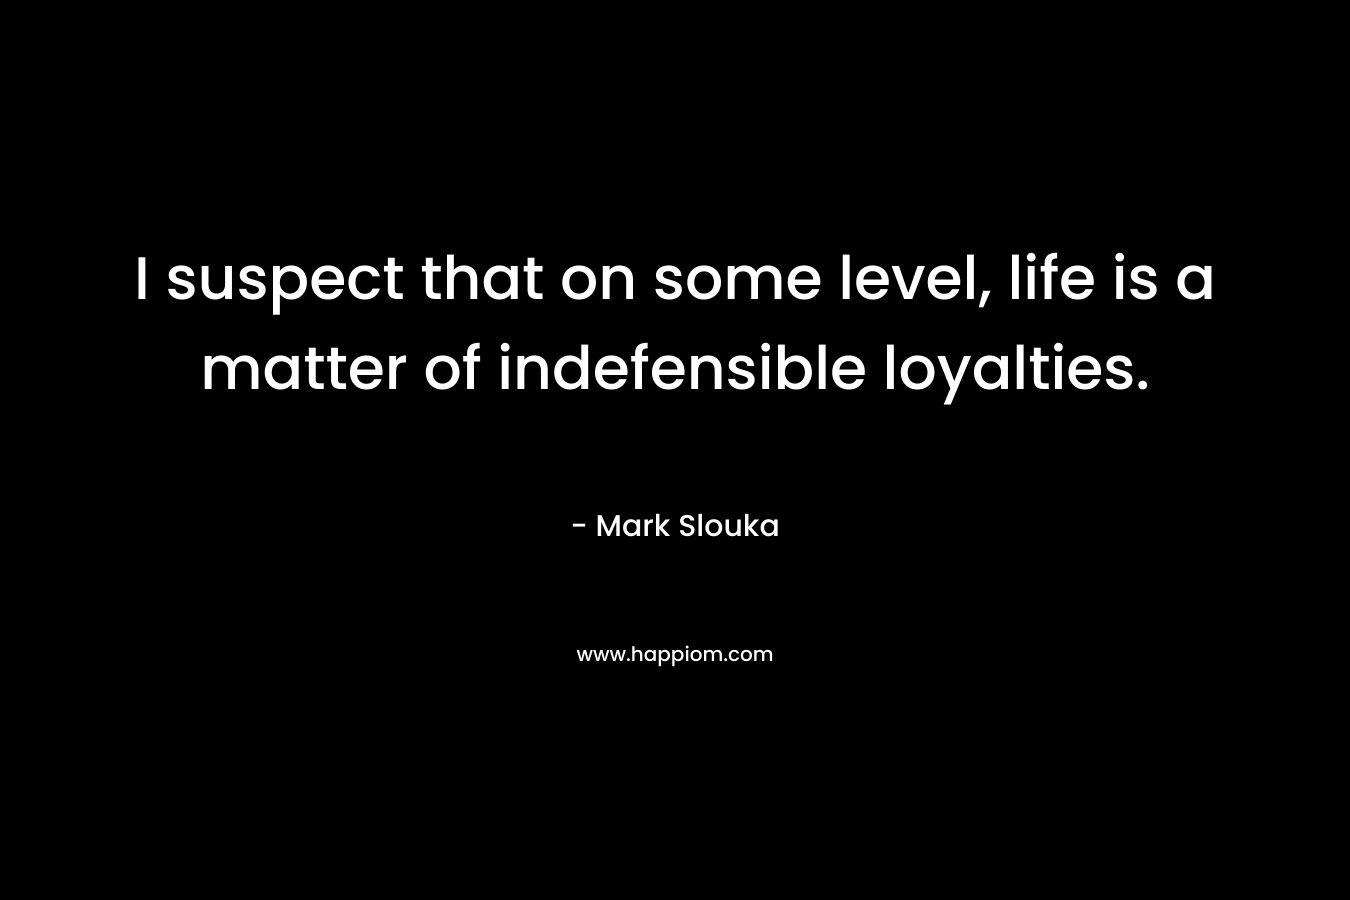 I suspect that on some level, life is a matter of indefensible loyalties. – Mark Slouka